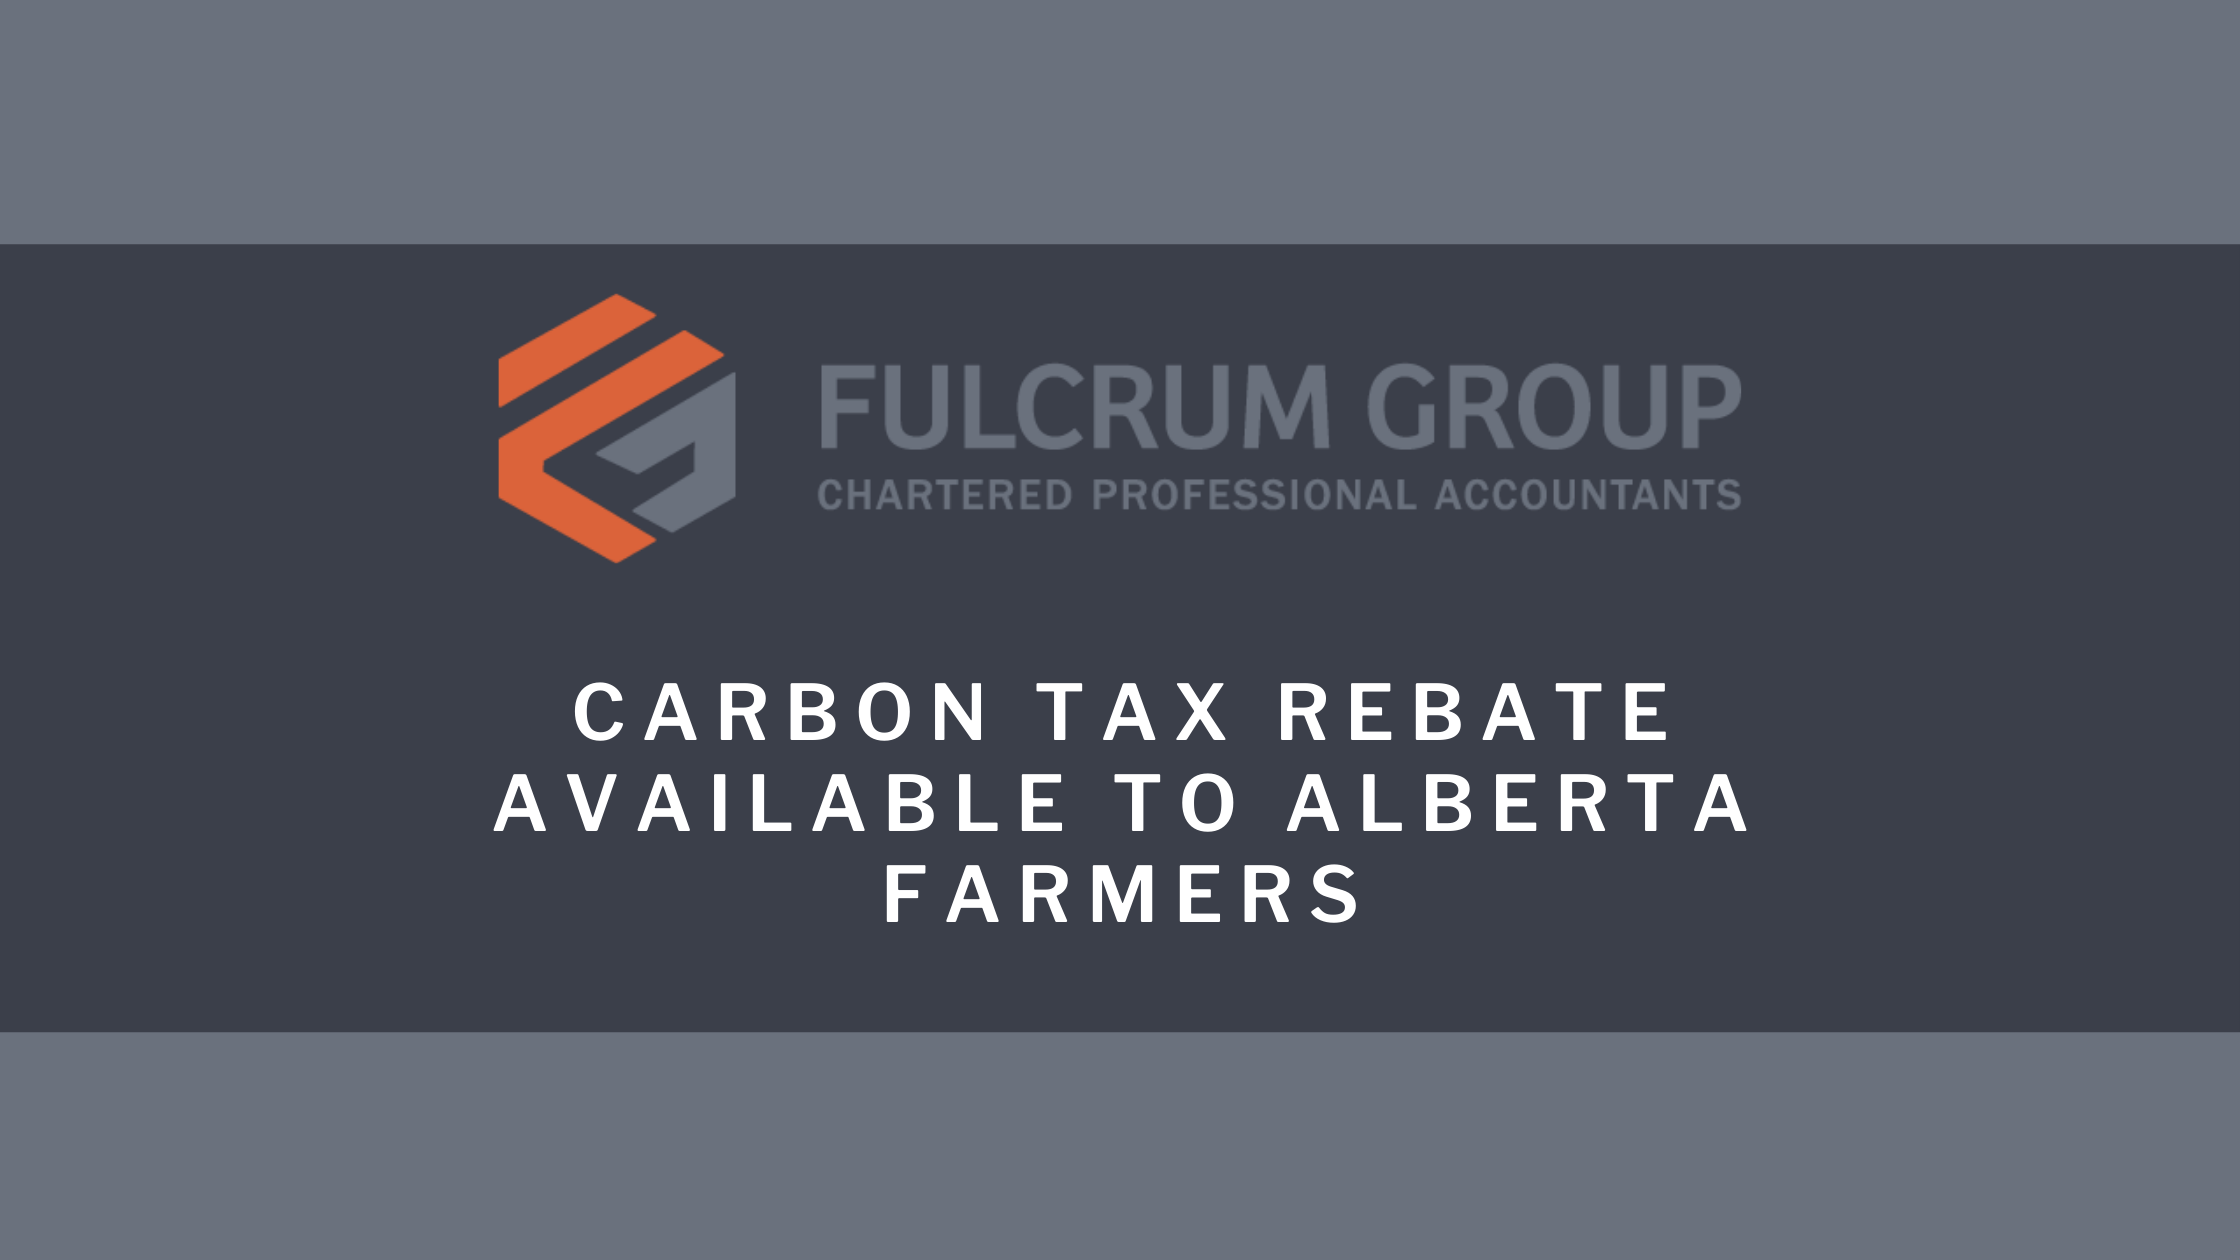 Carbon Tax Rebate Available To Alberta Farmers Fulcrum Group 